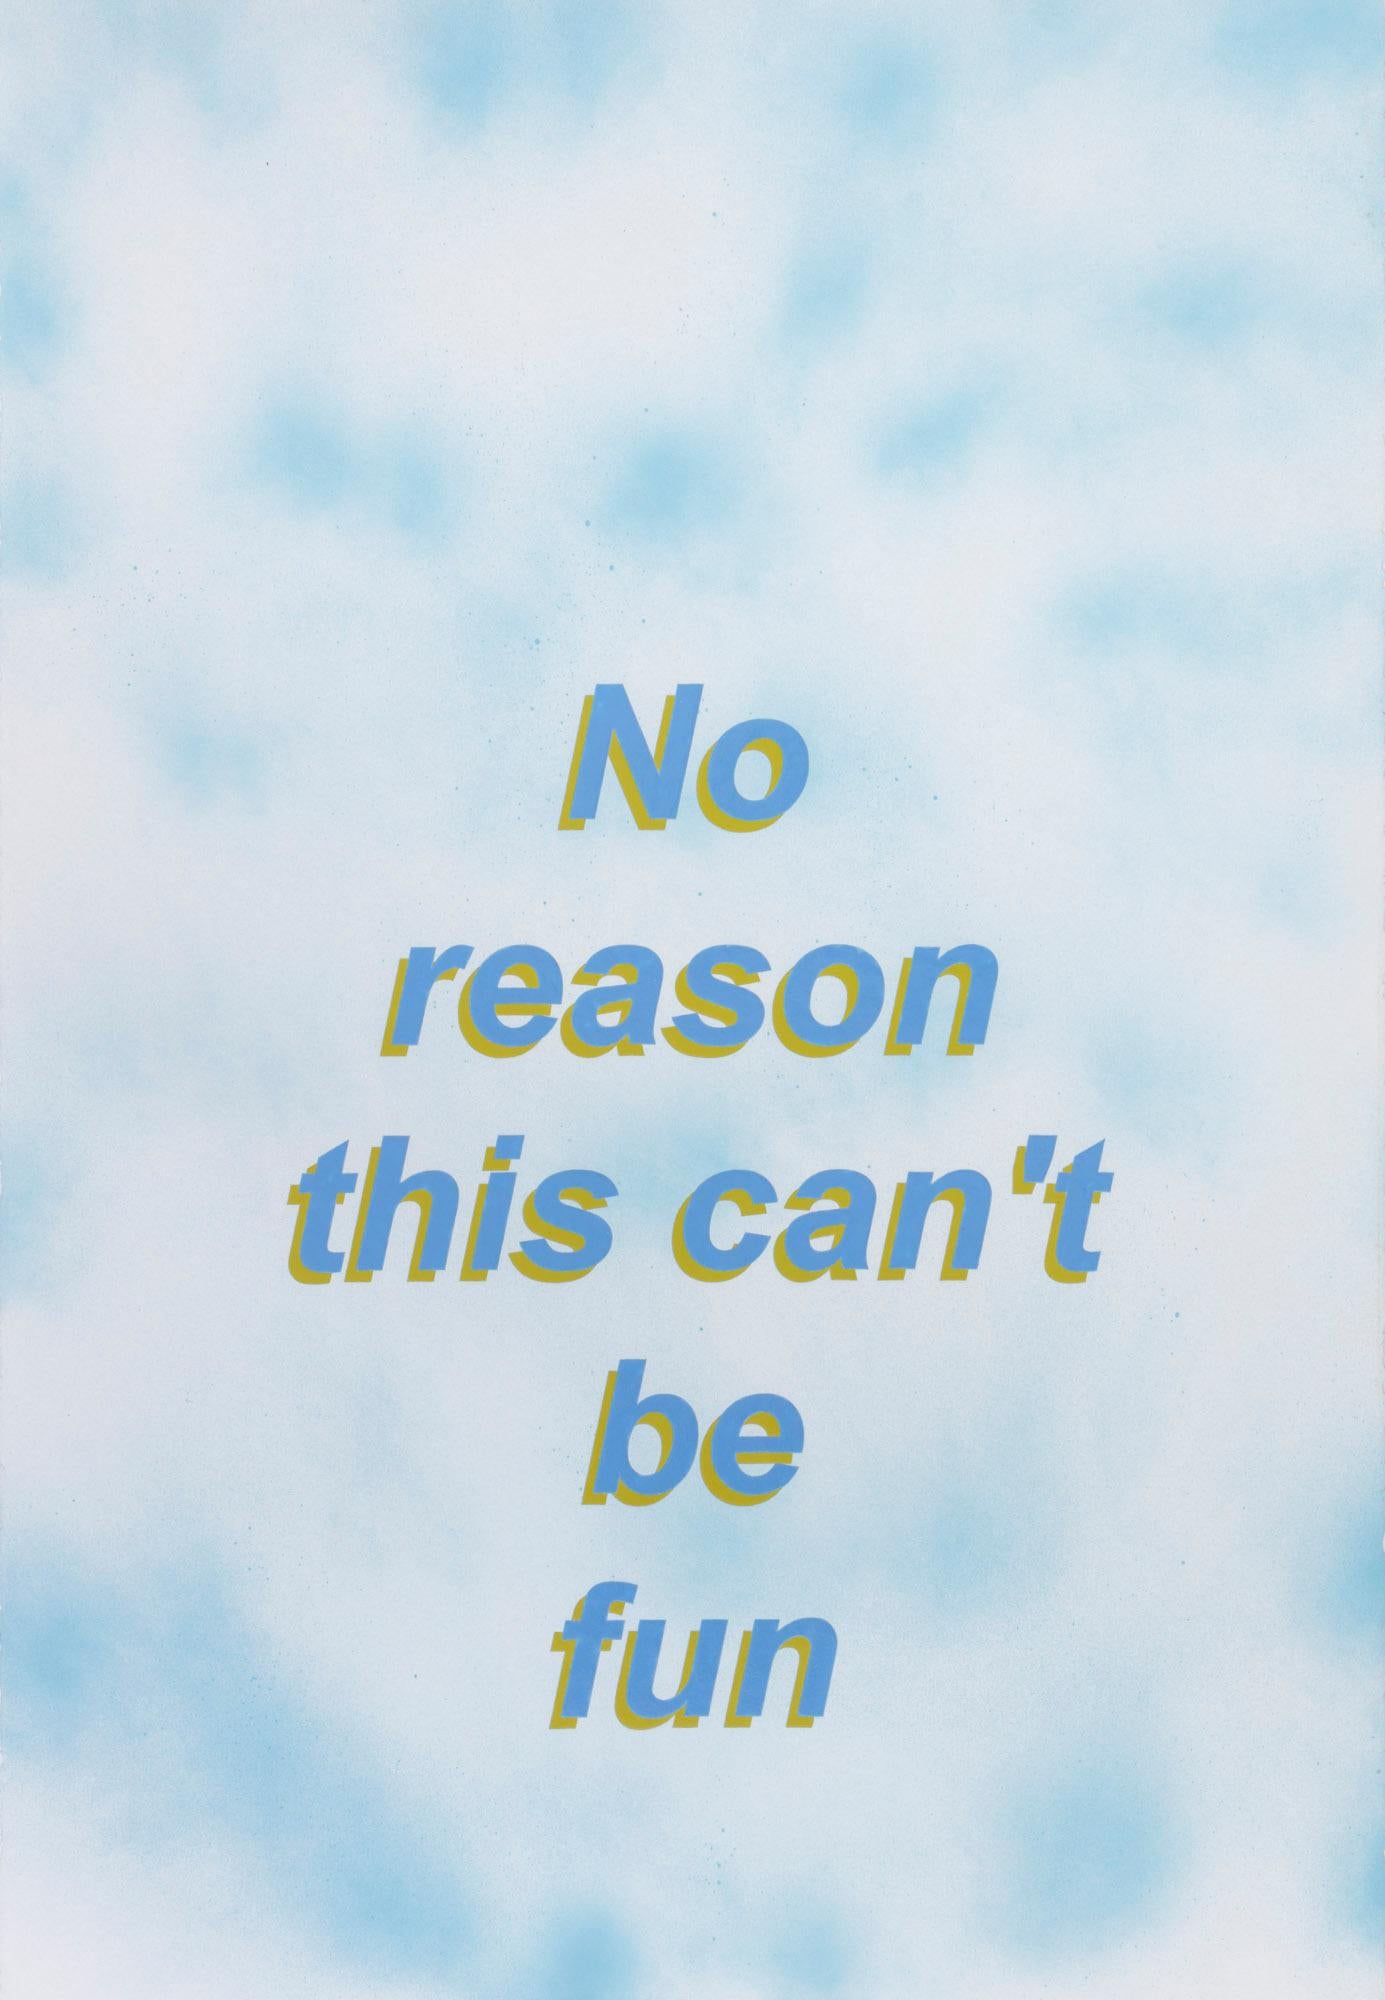 Untitled (No reason this can't be fun), 2017 is a unique contemporary textual painting on paper. The artist first creates a unique background atmosphere with matte spray paint and then meticulously hand-paints text in his material of choice, nail